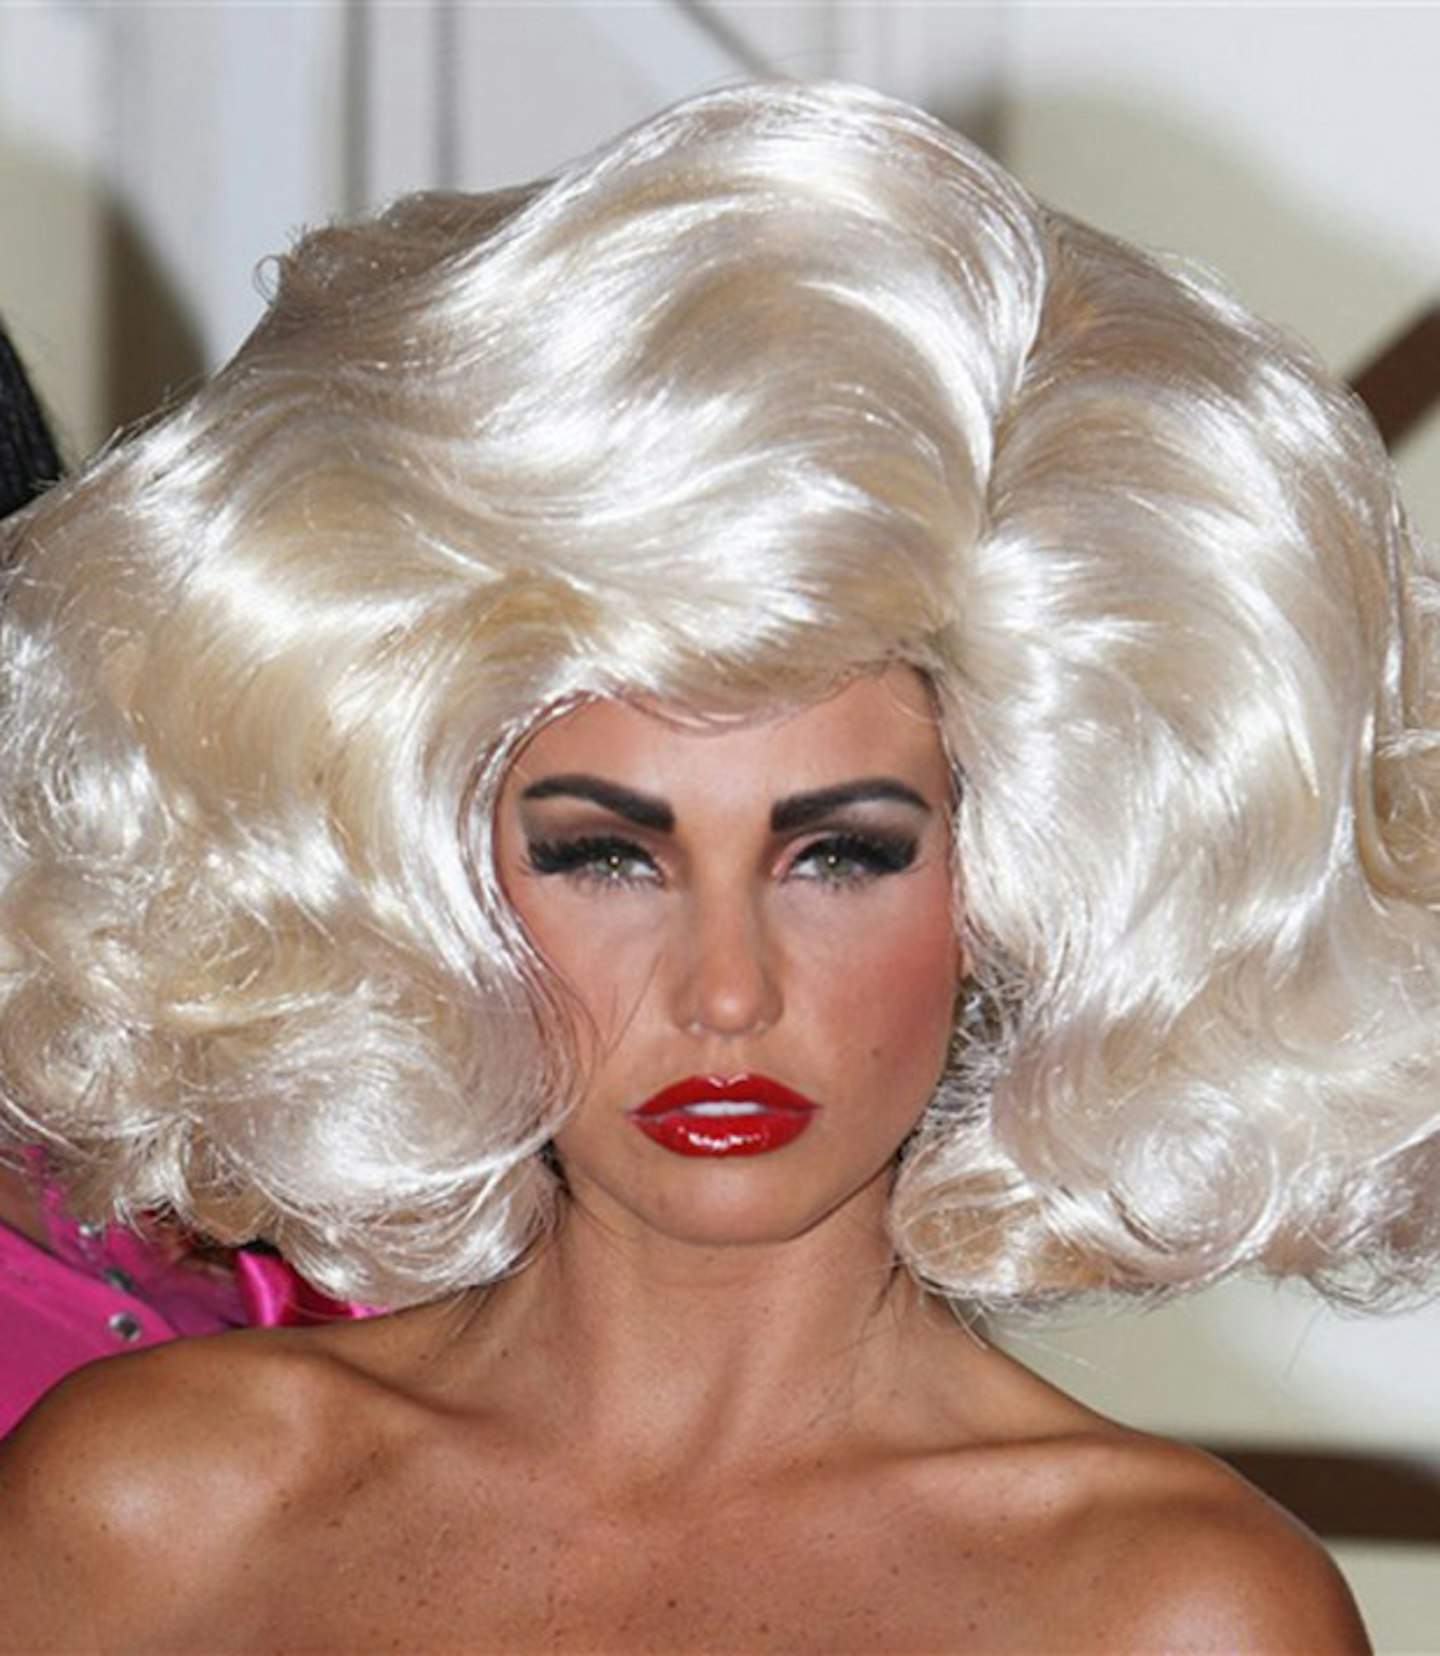 katie-price-jordan-cosmetic-plastic-surgery-before-and-after-43